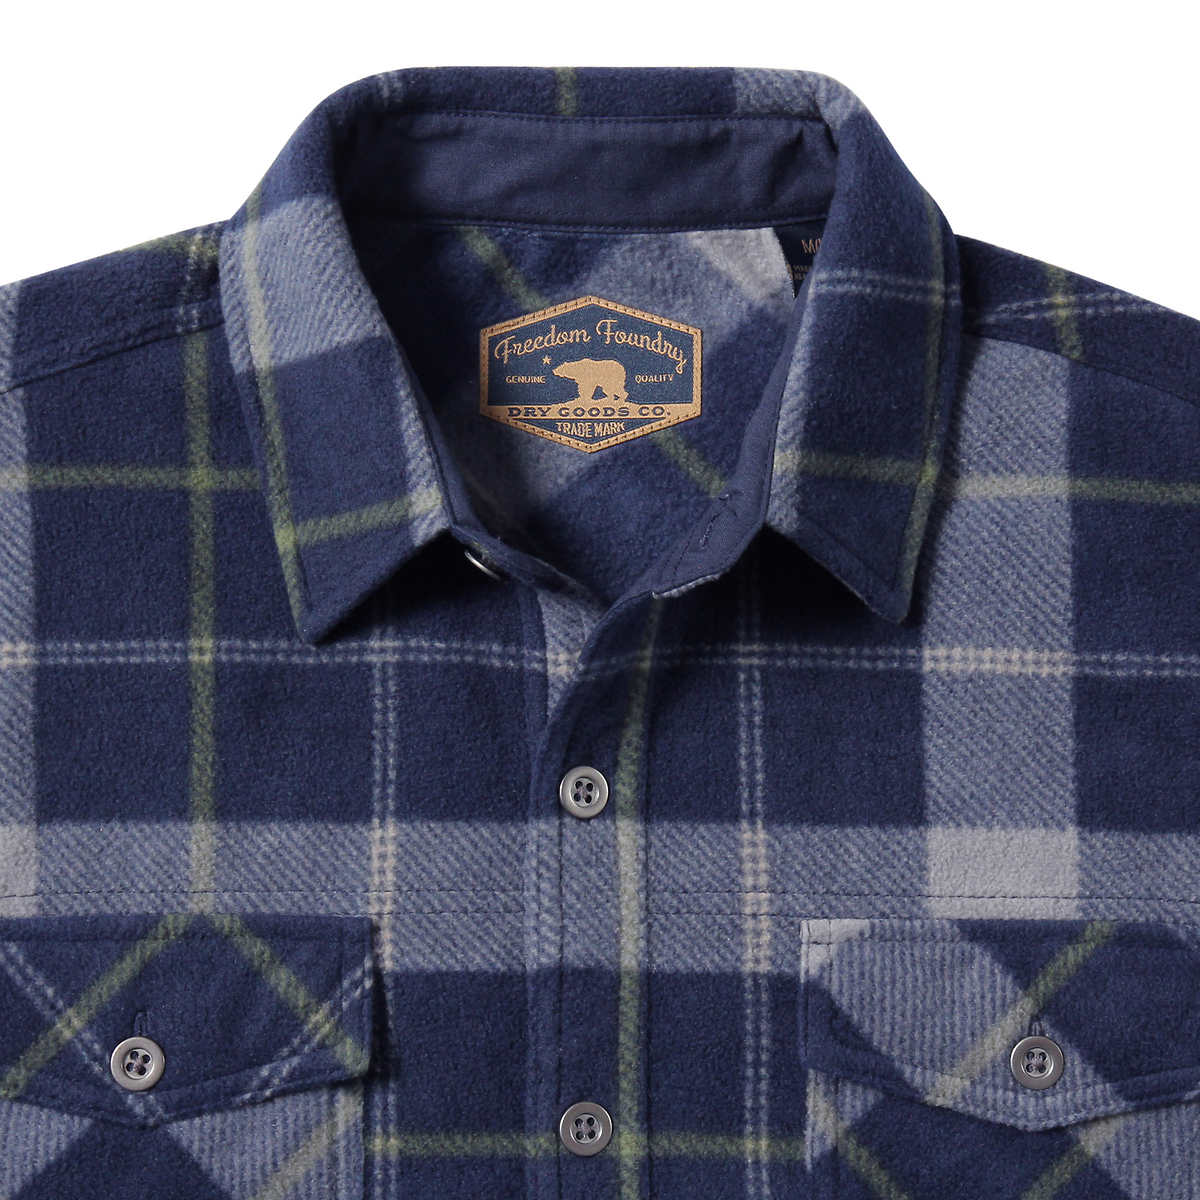 Freedom Foundry Men’s Plaid Fleece Comfort Fit Button Up Shirt